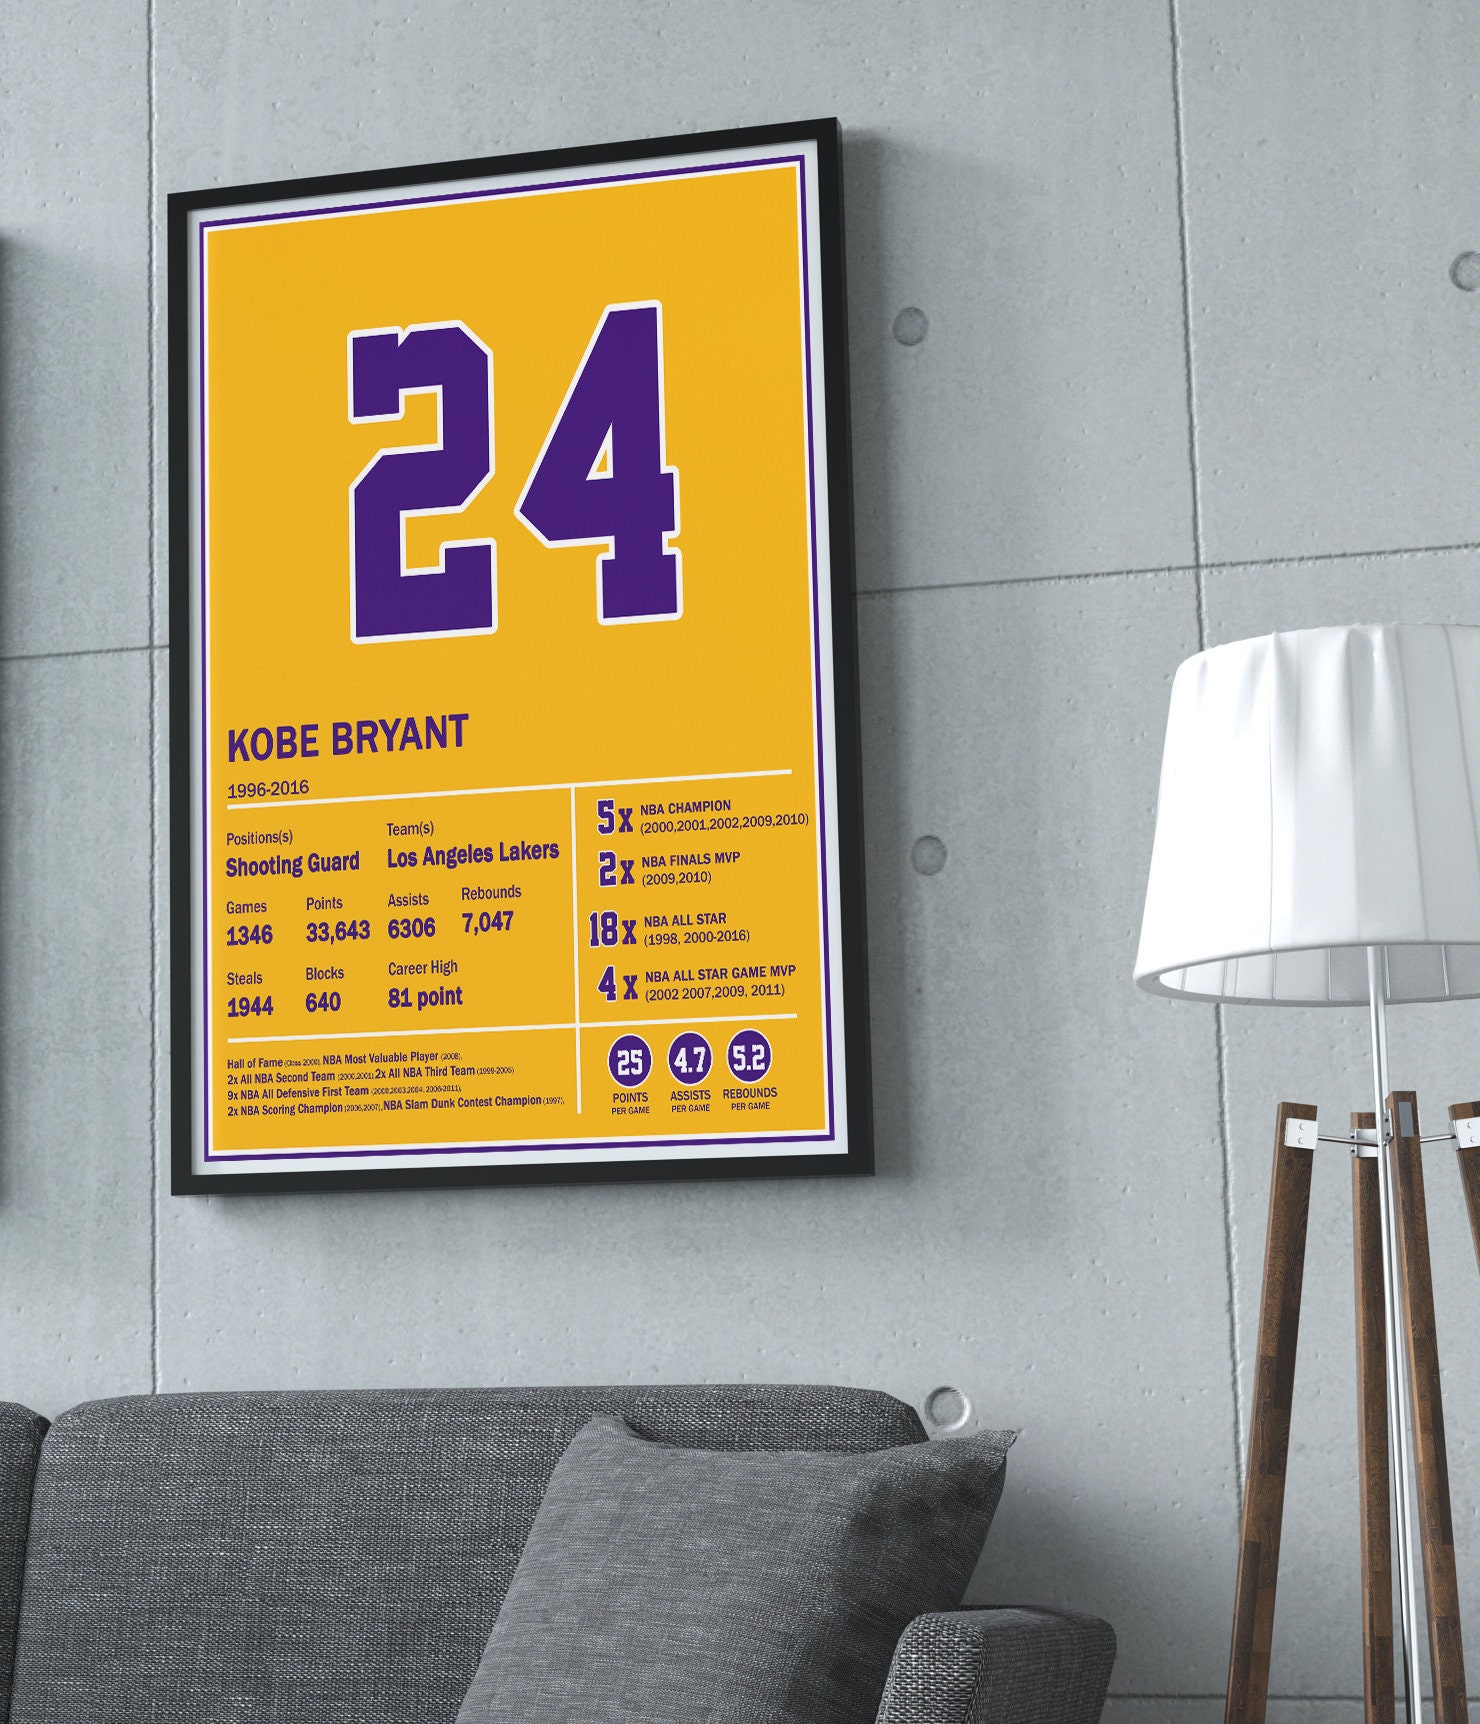 KOBE BRYANT Autographed '81 Point Game' Emb. Authentic Lakers